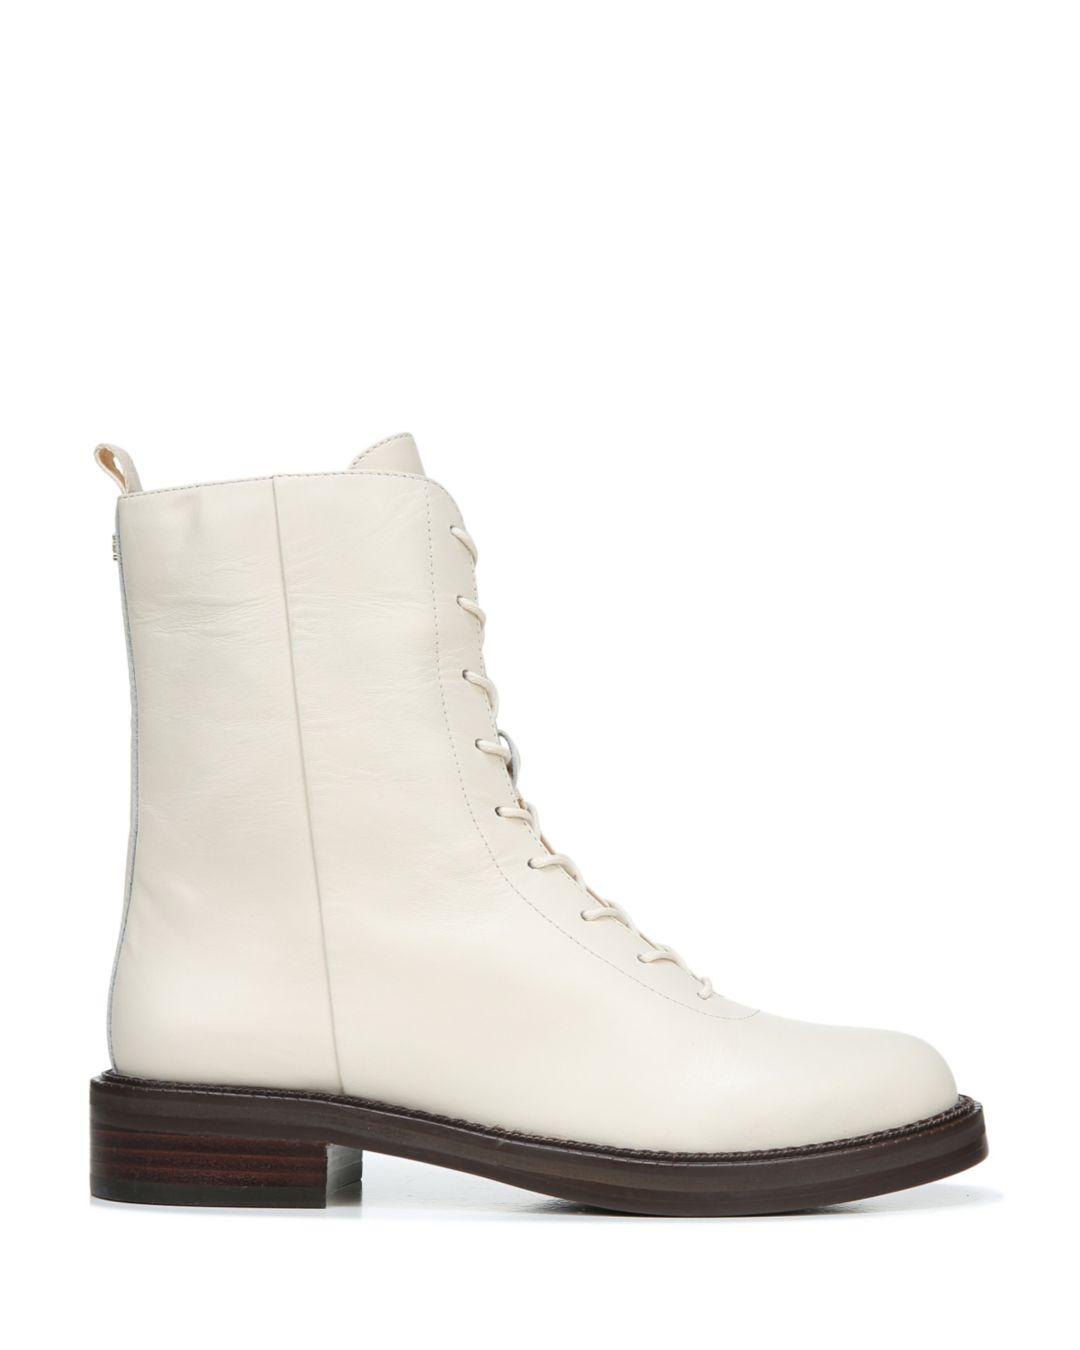 Sam Edelman Leather Women's Nellyn Lace Up Boots in Ivory (White) - Lyst